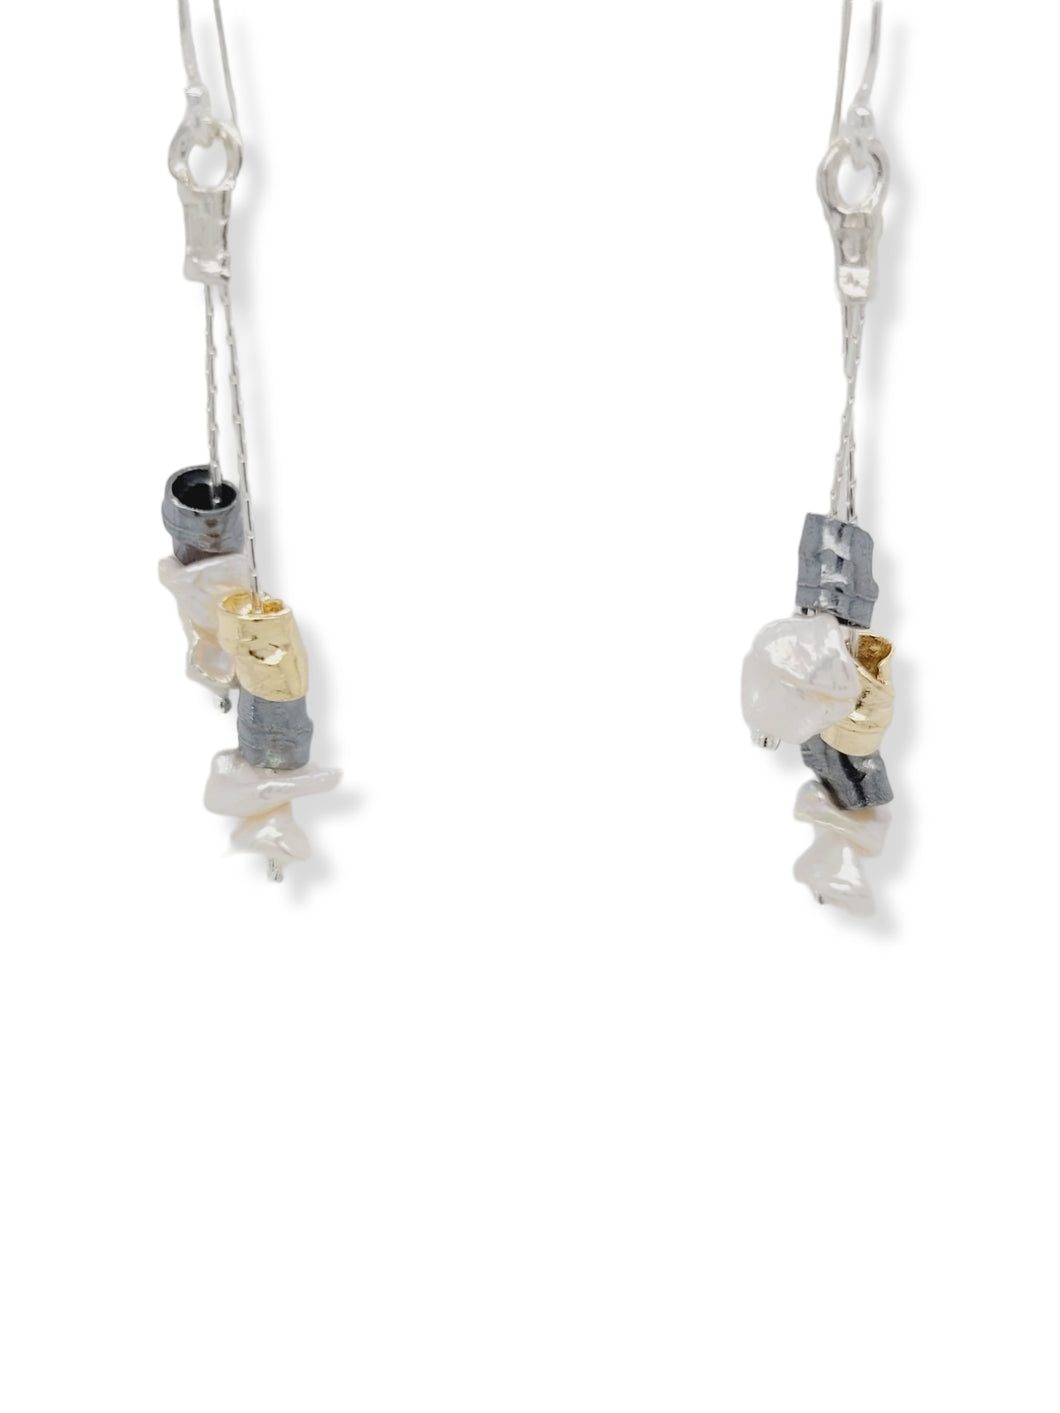 Gold plated & oxidized sterling silver earrings with pearls